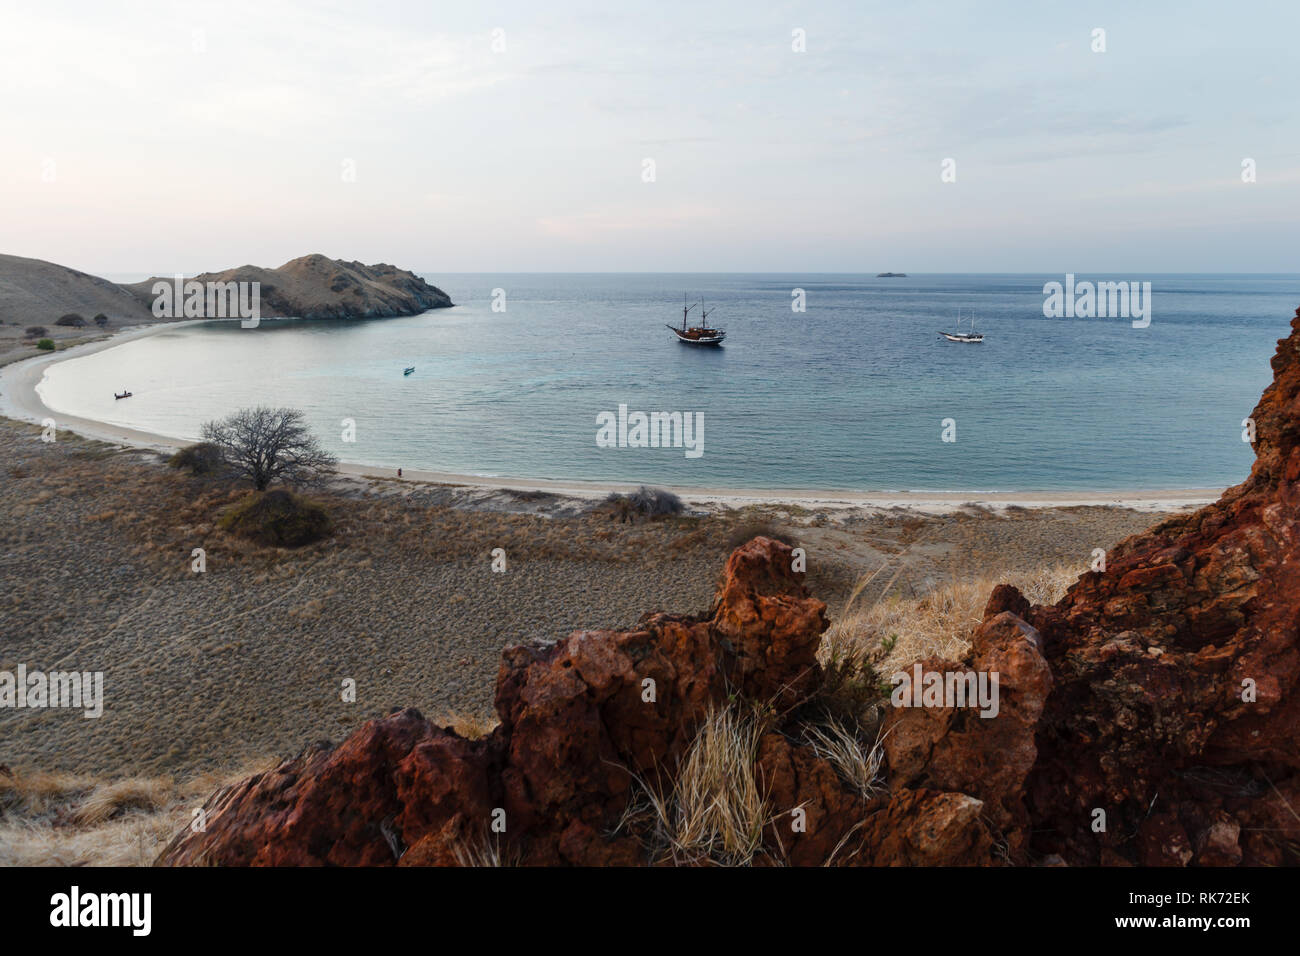 Cove at Pulau Lawalaut island with two boats moored inside Stock Photo